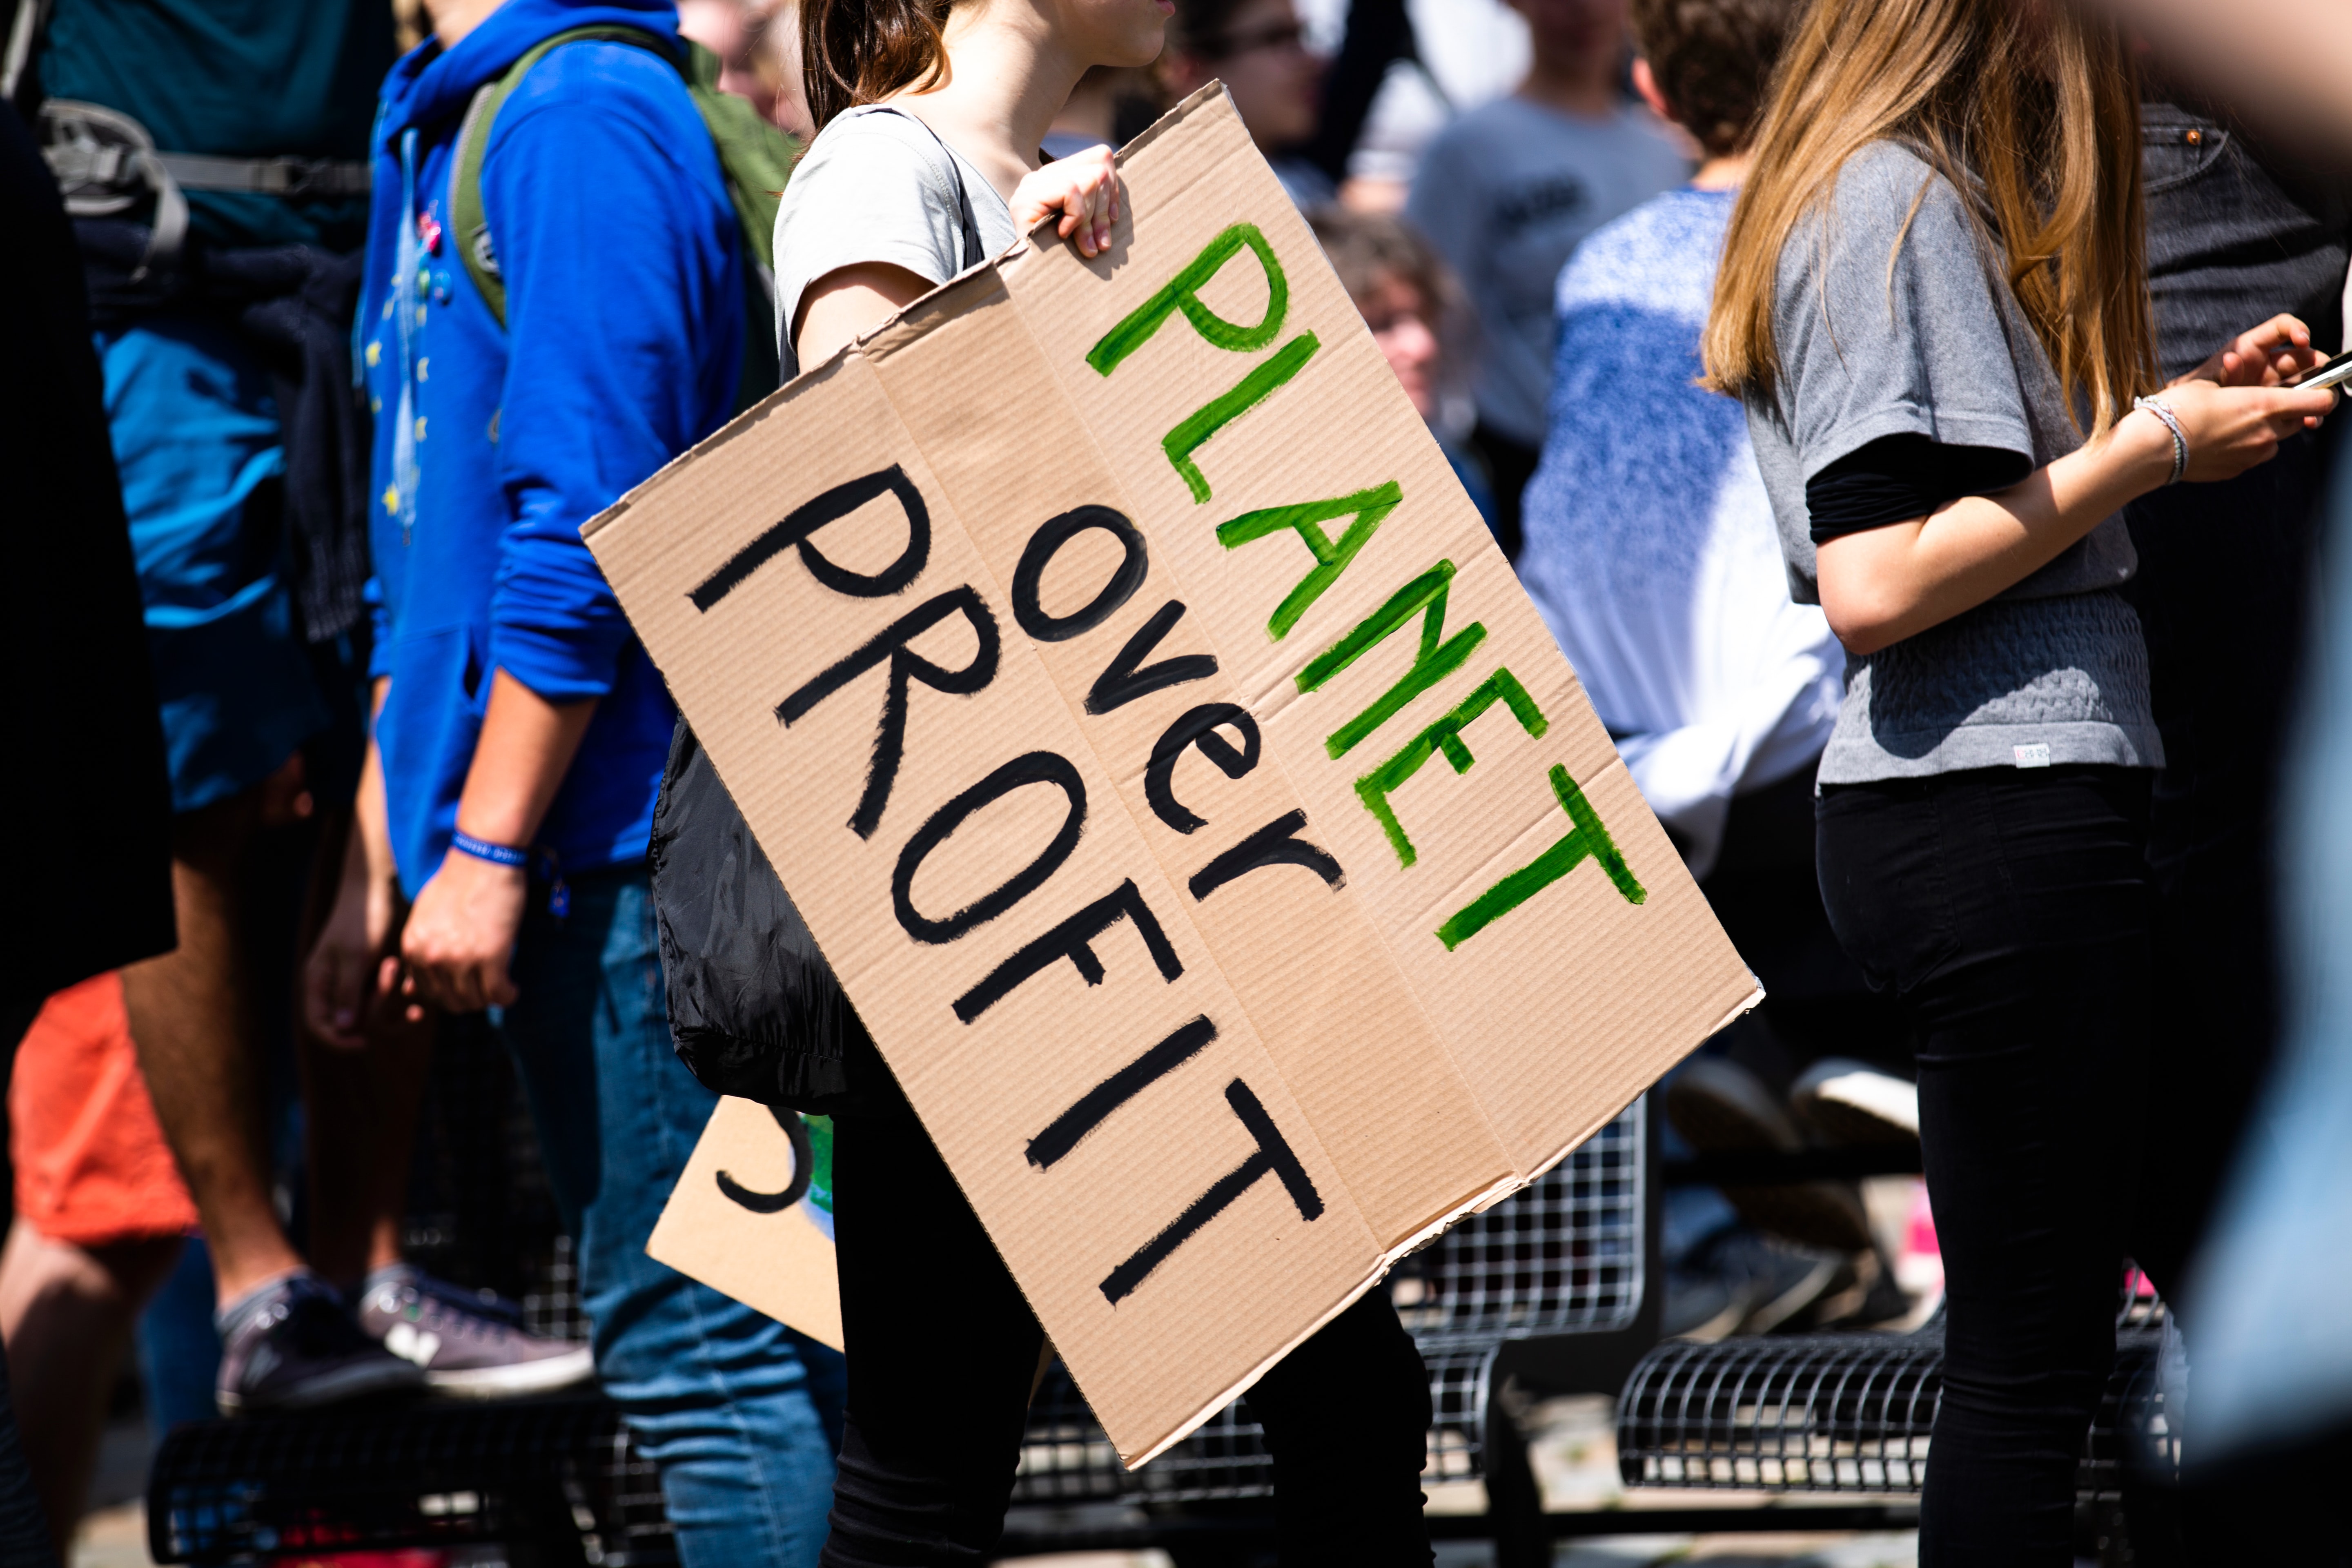 Global climate strike on the European elections (May 24 2019)